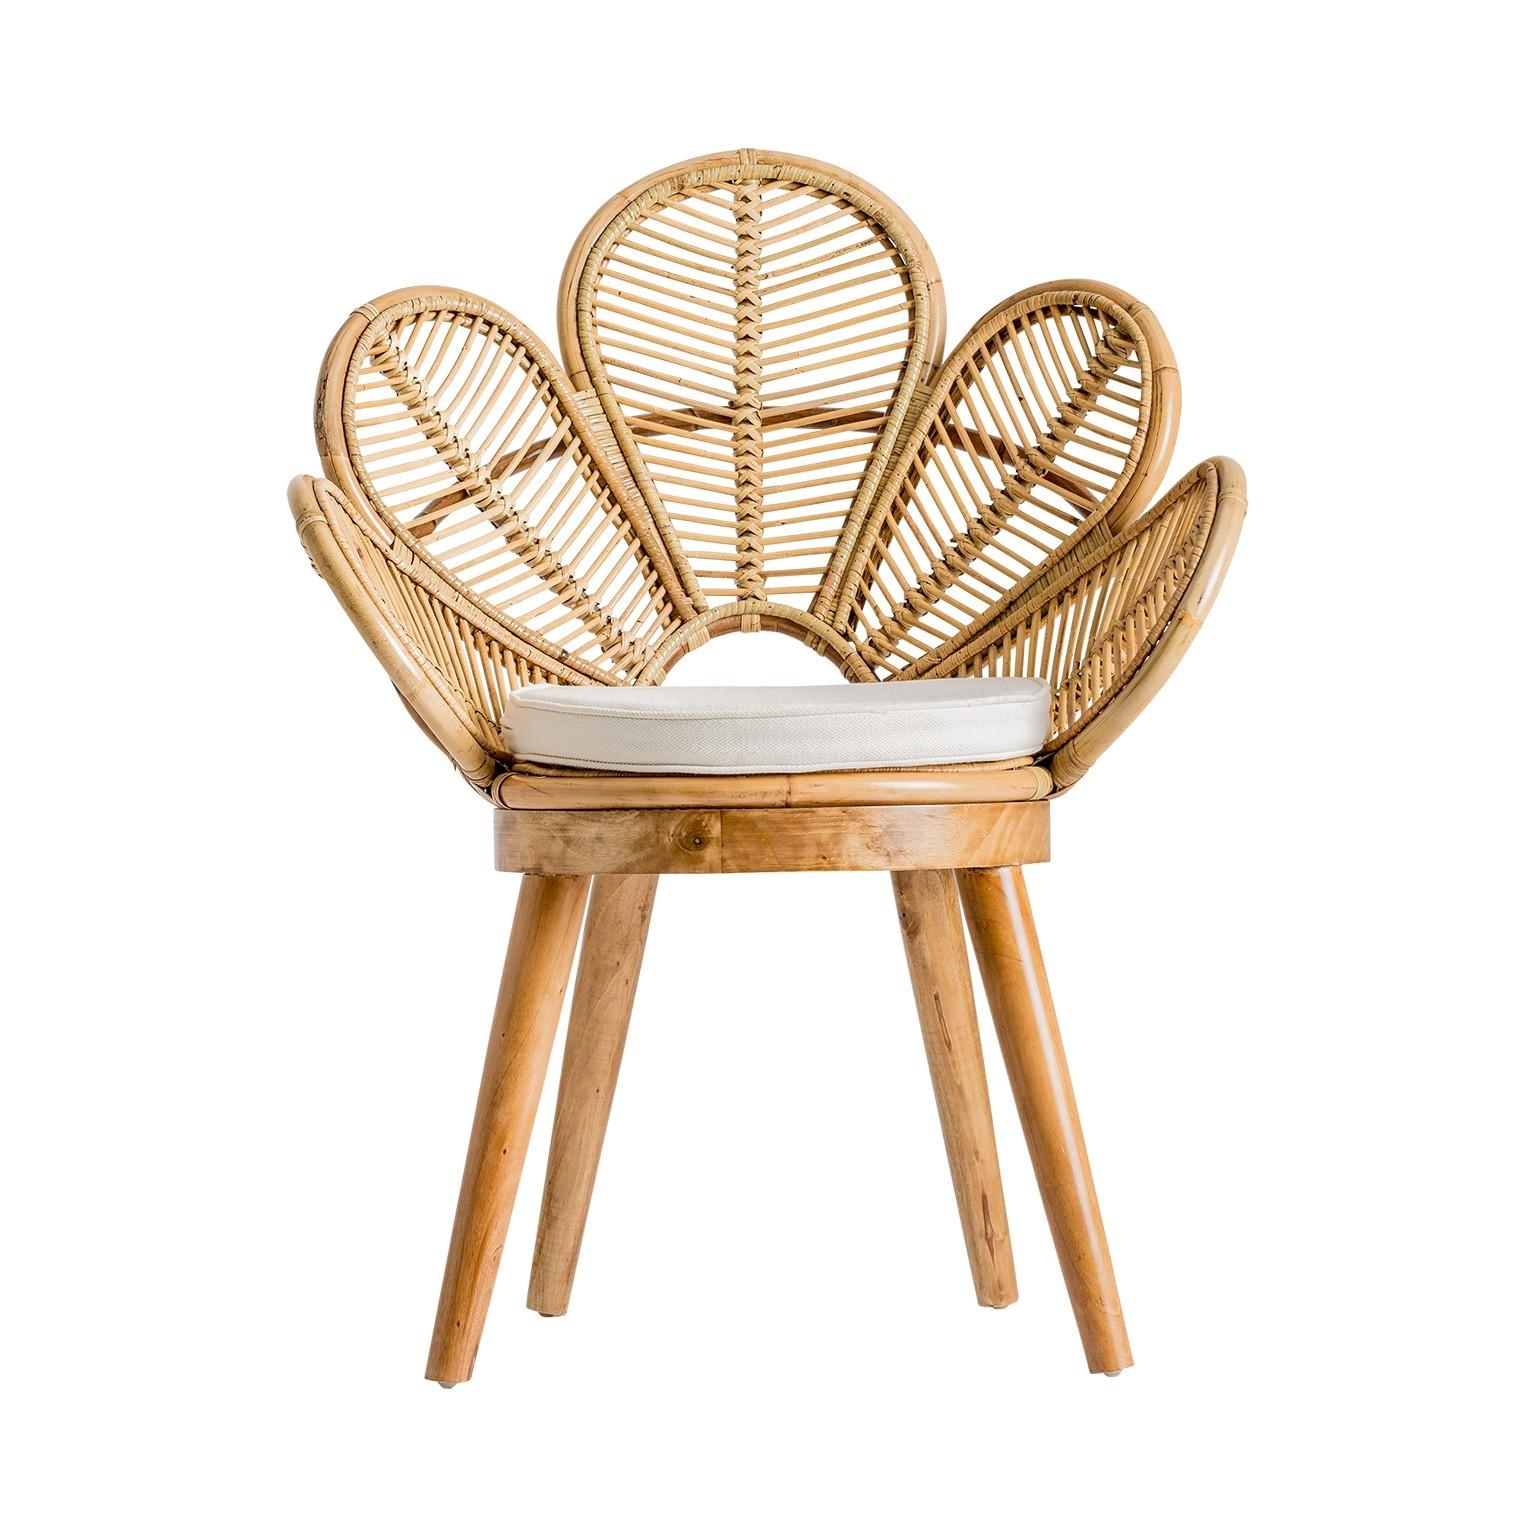 European Wooden and Rattan Flower Shaped Chair